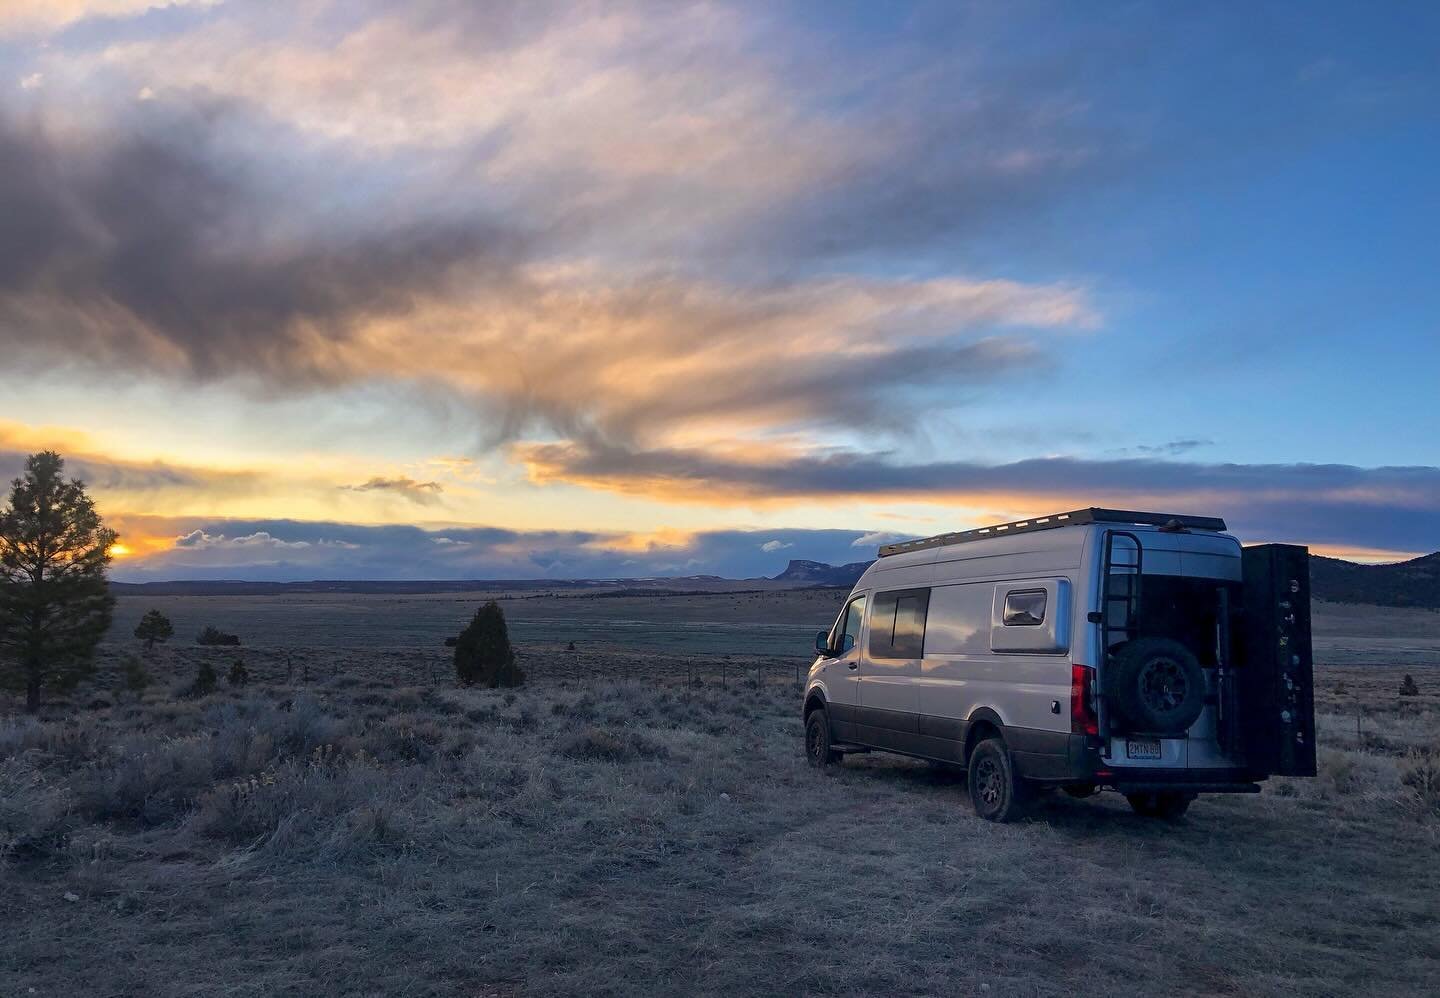 Live your life to the fullest - On the road with a Nirvana Upfitters van! ✨🚐✨
Enjoy sunsets, sunrises, &amp; views from the comfort of your van, wherever you choose! 
⠀⠀⠀⠀⠀⠀⠀⠀⠀
Thanks to our customers for this beautiful photo as they adventure acros